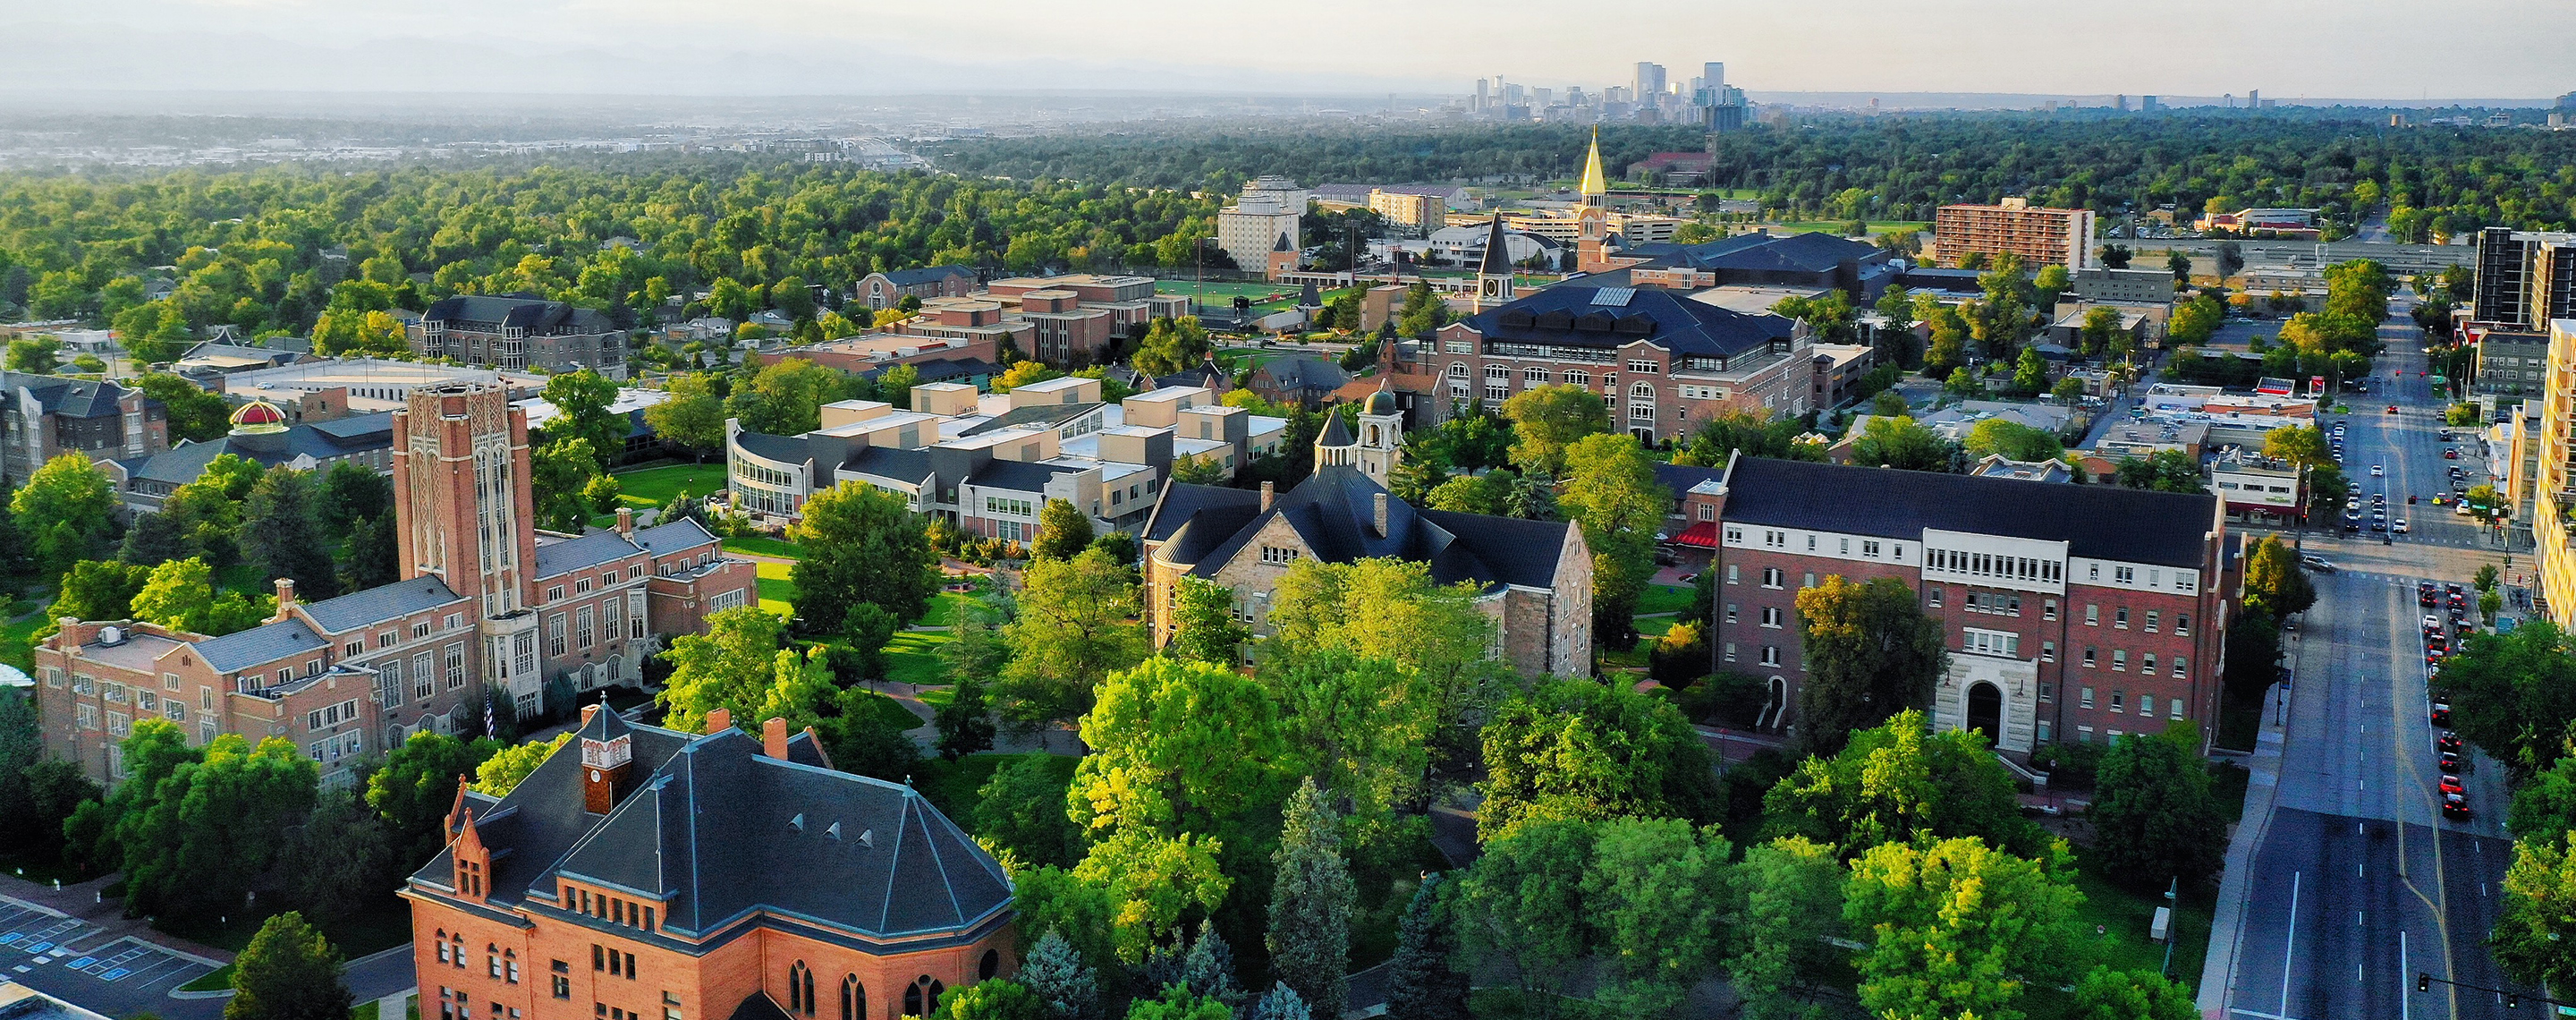 The University of Denver: A Four-Dimensional Experience